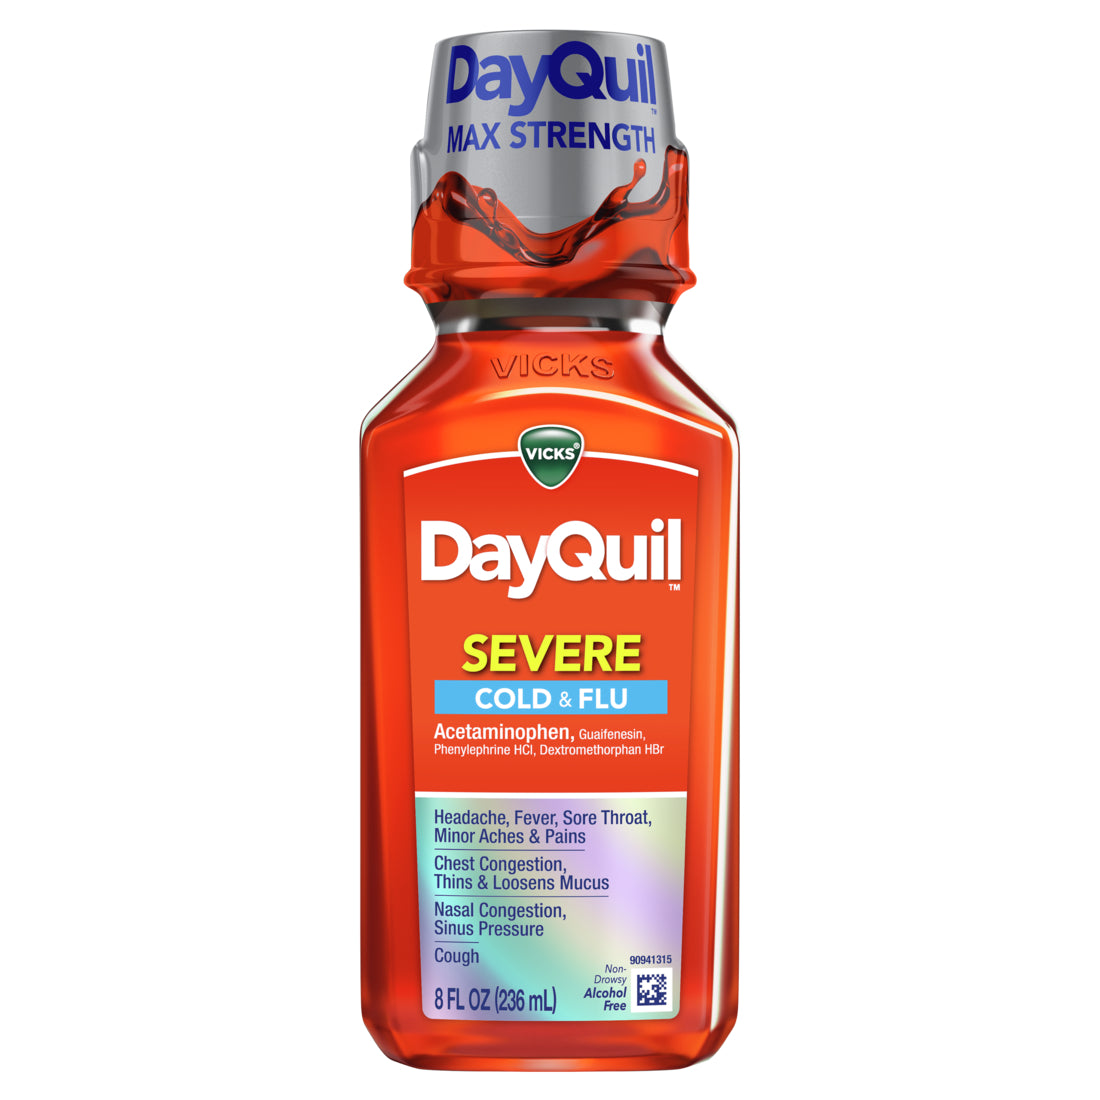 Vicks DayQuil SEVERE Cold and Flu Medicine - 8oz/12pk